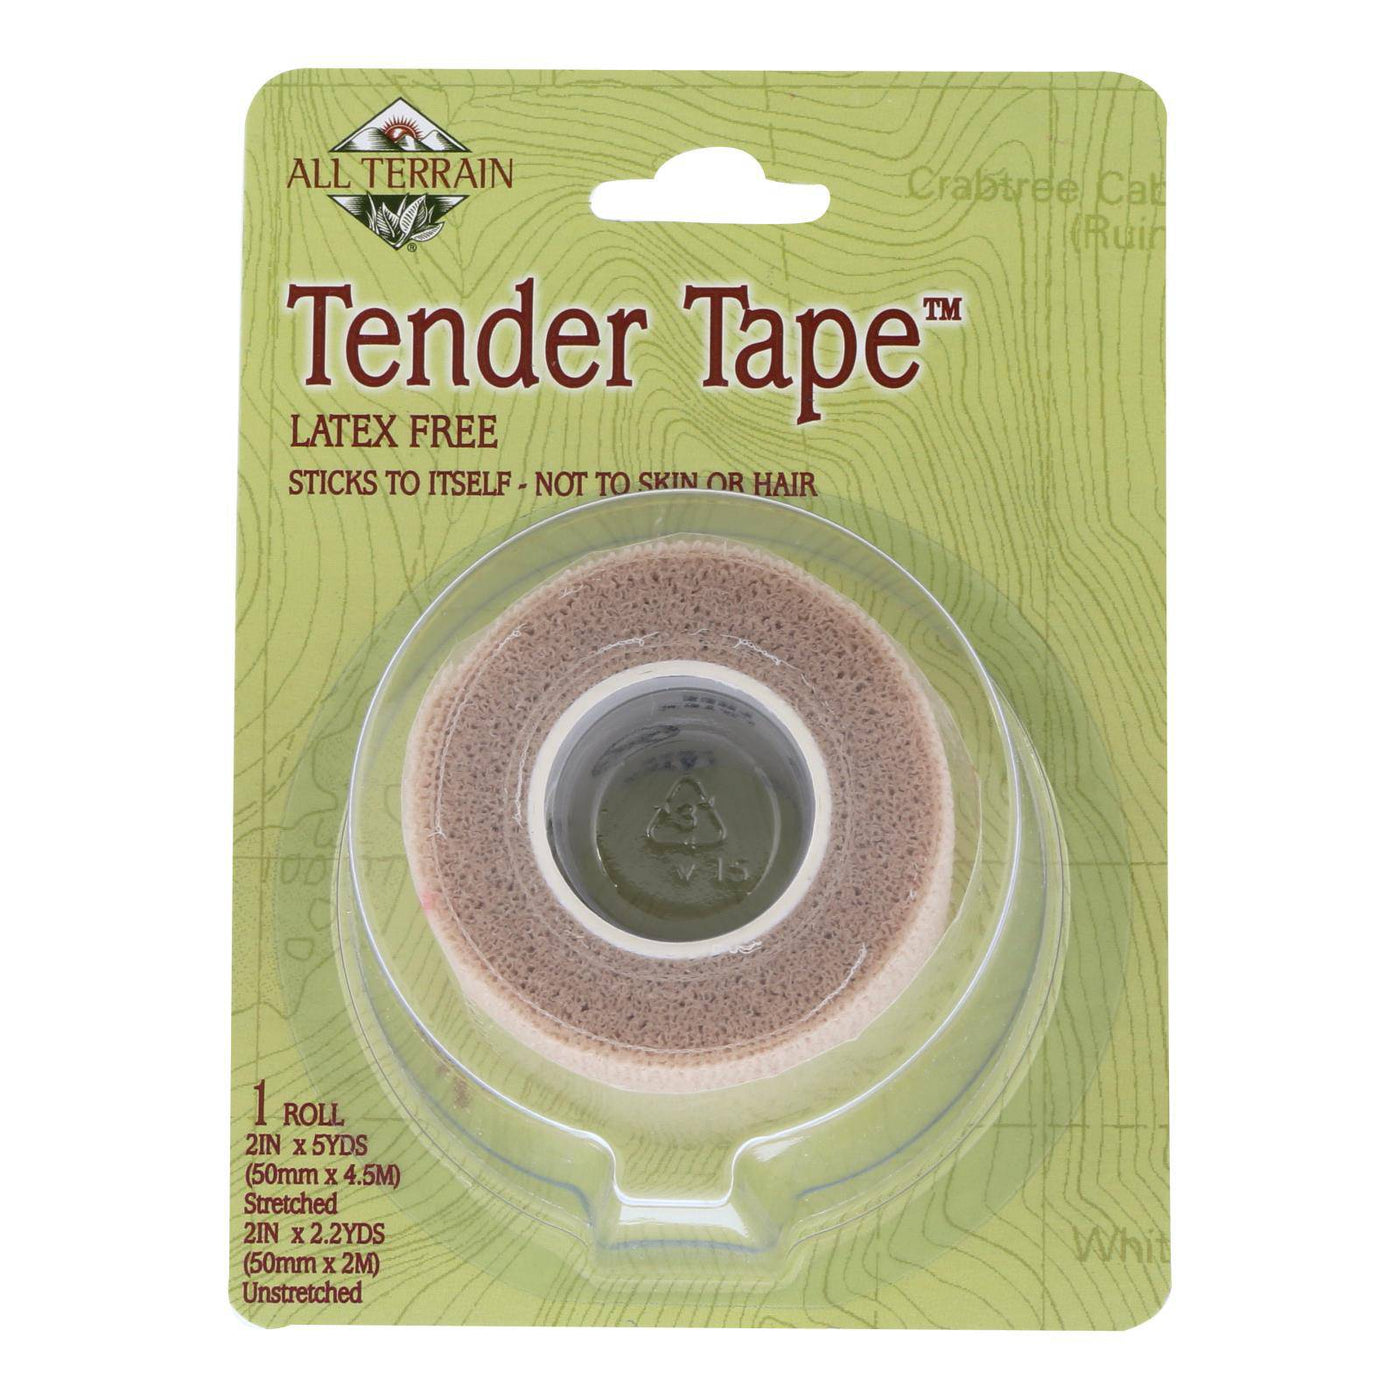 All Terrain - Tender Tape - 2 Inches X 5 Yards - 1 Roll | OnlyNaturals.us